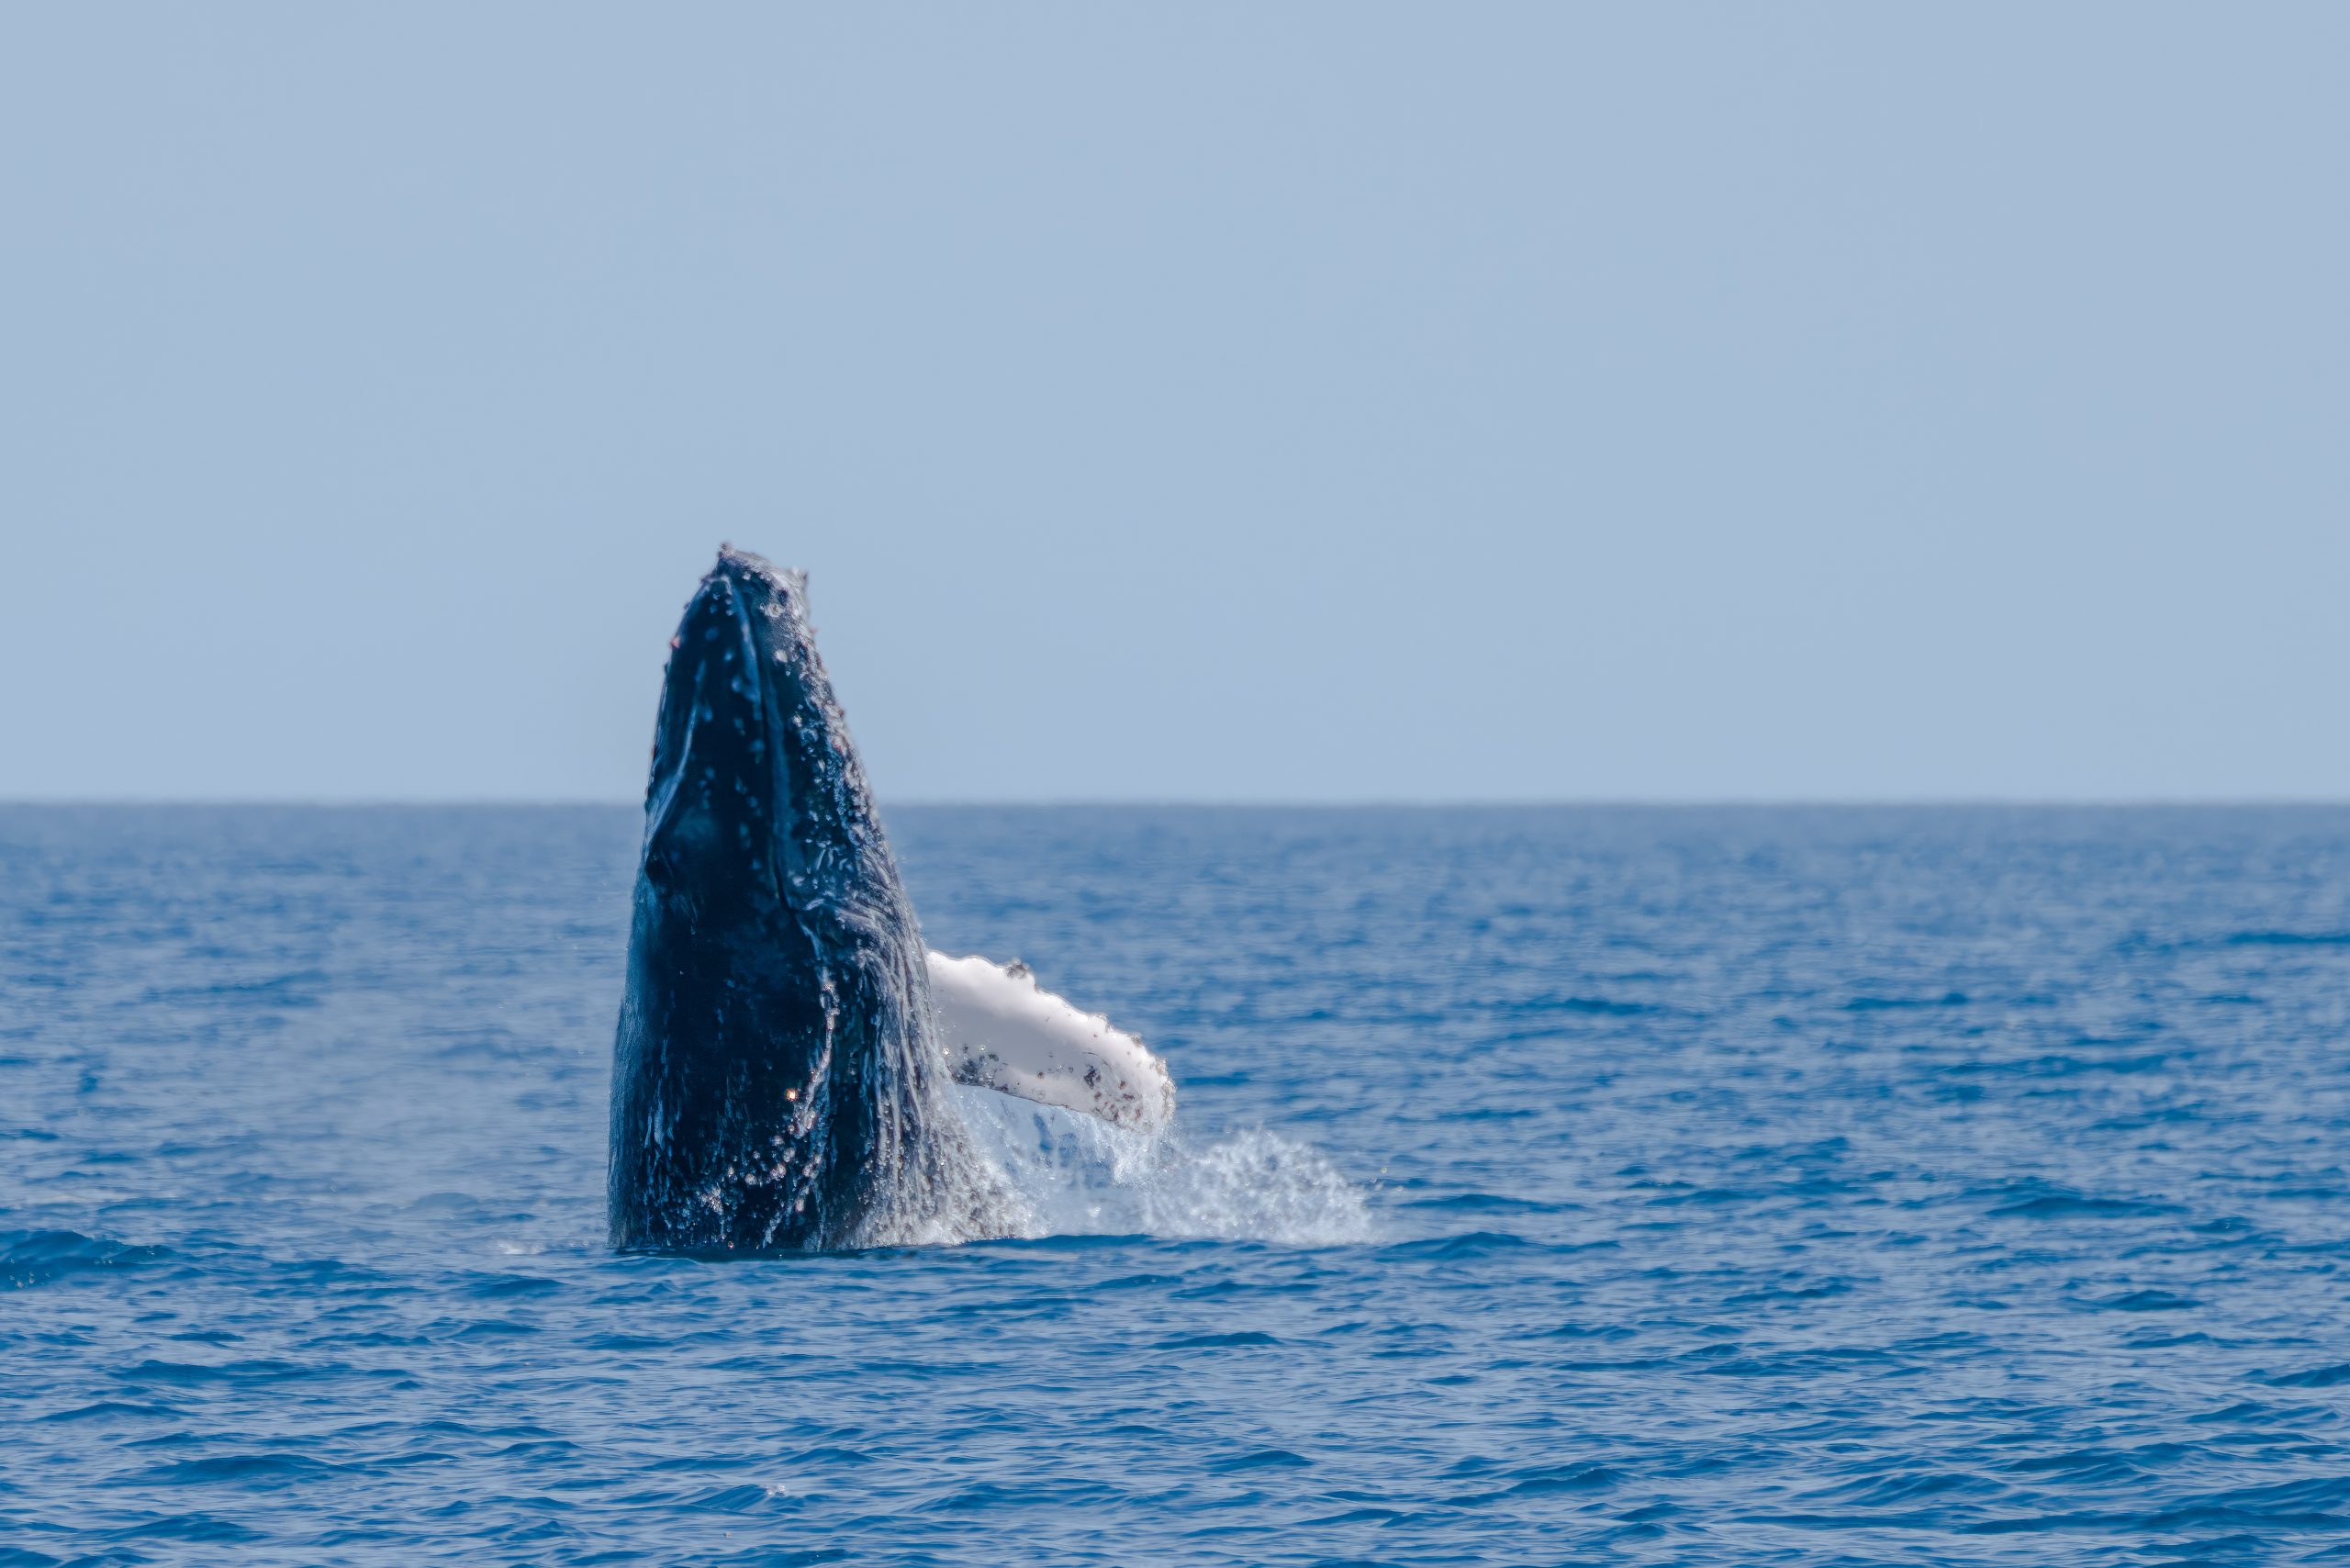 Sailing For Science: Freeing A Humpback Whale